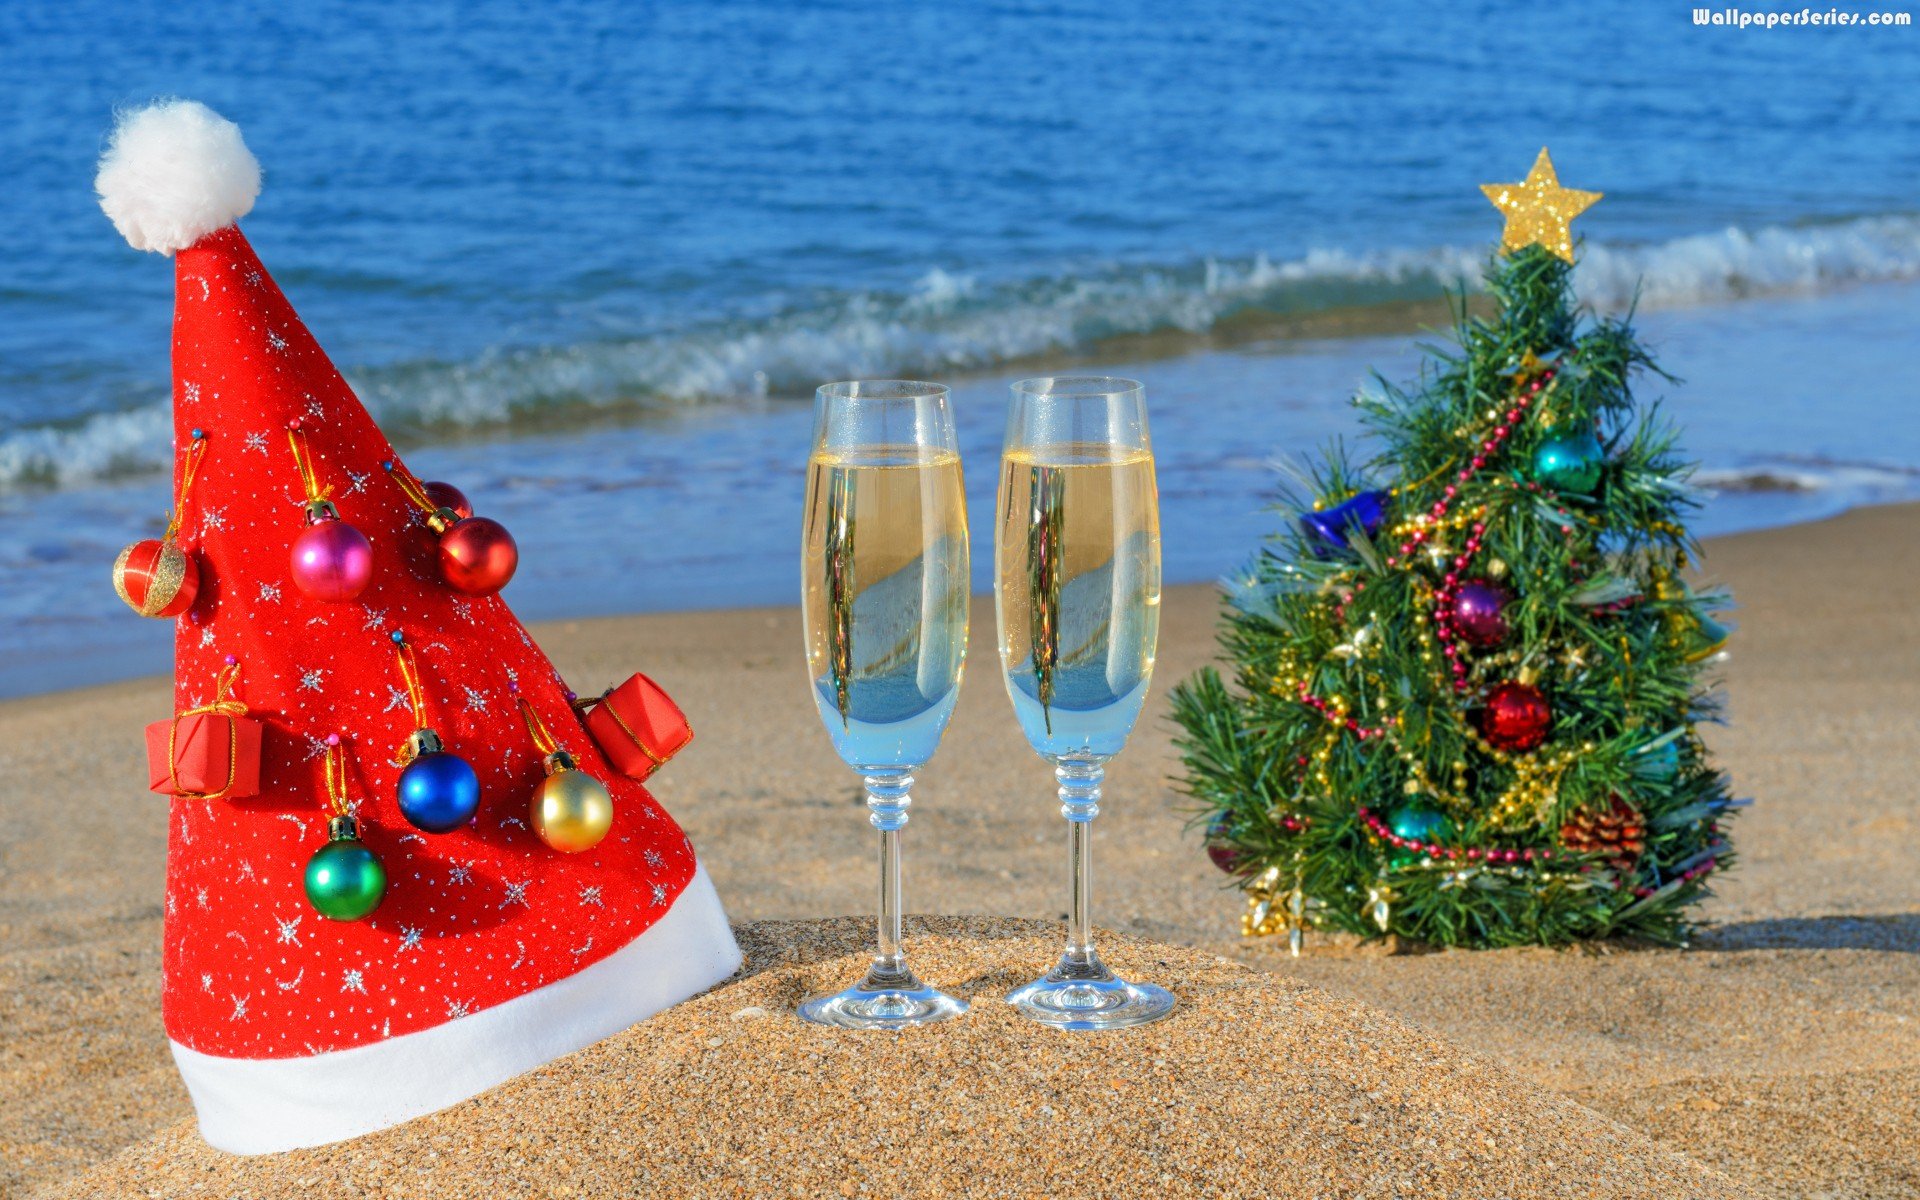 Christmas beach picture from all around the world